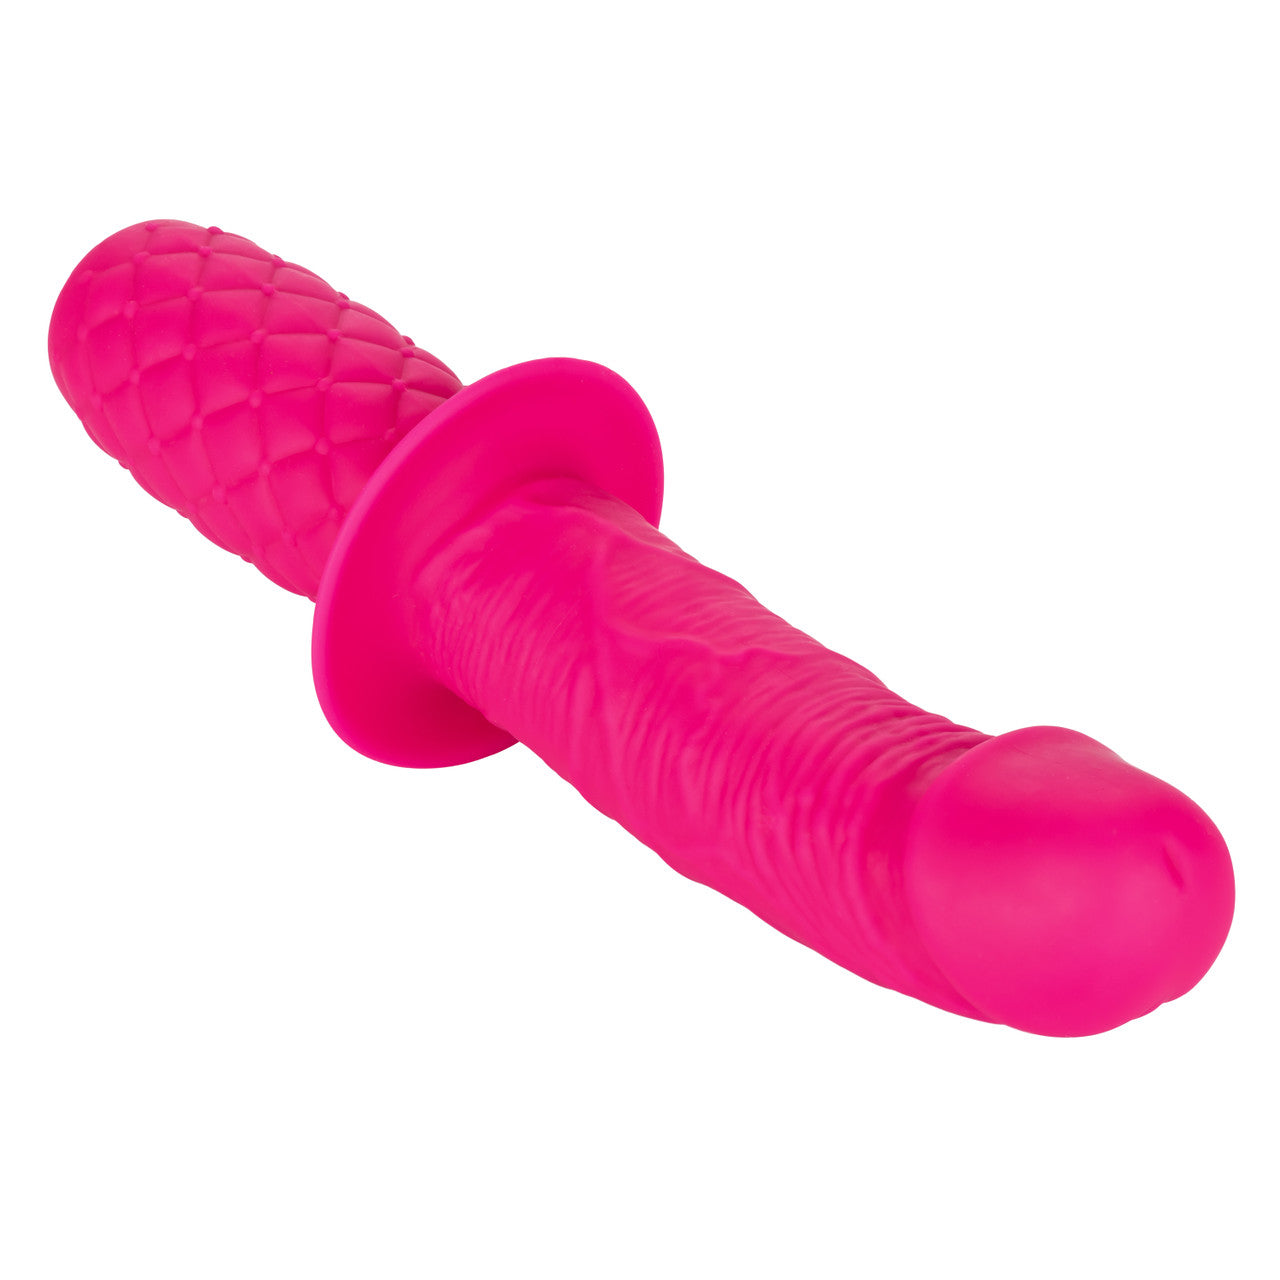 Silicone Grip Thruster - Pink - Thorn & Feather